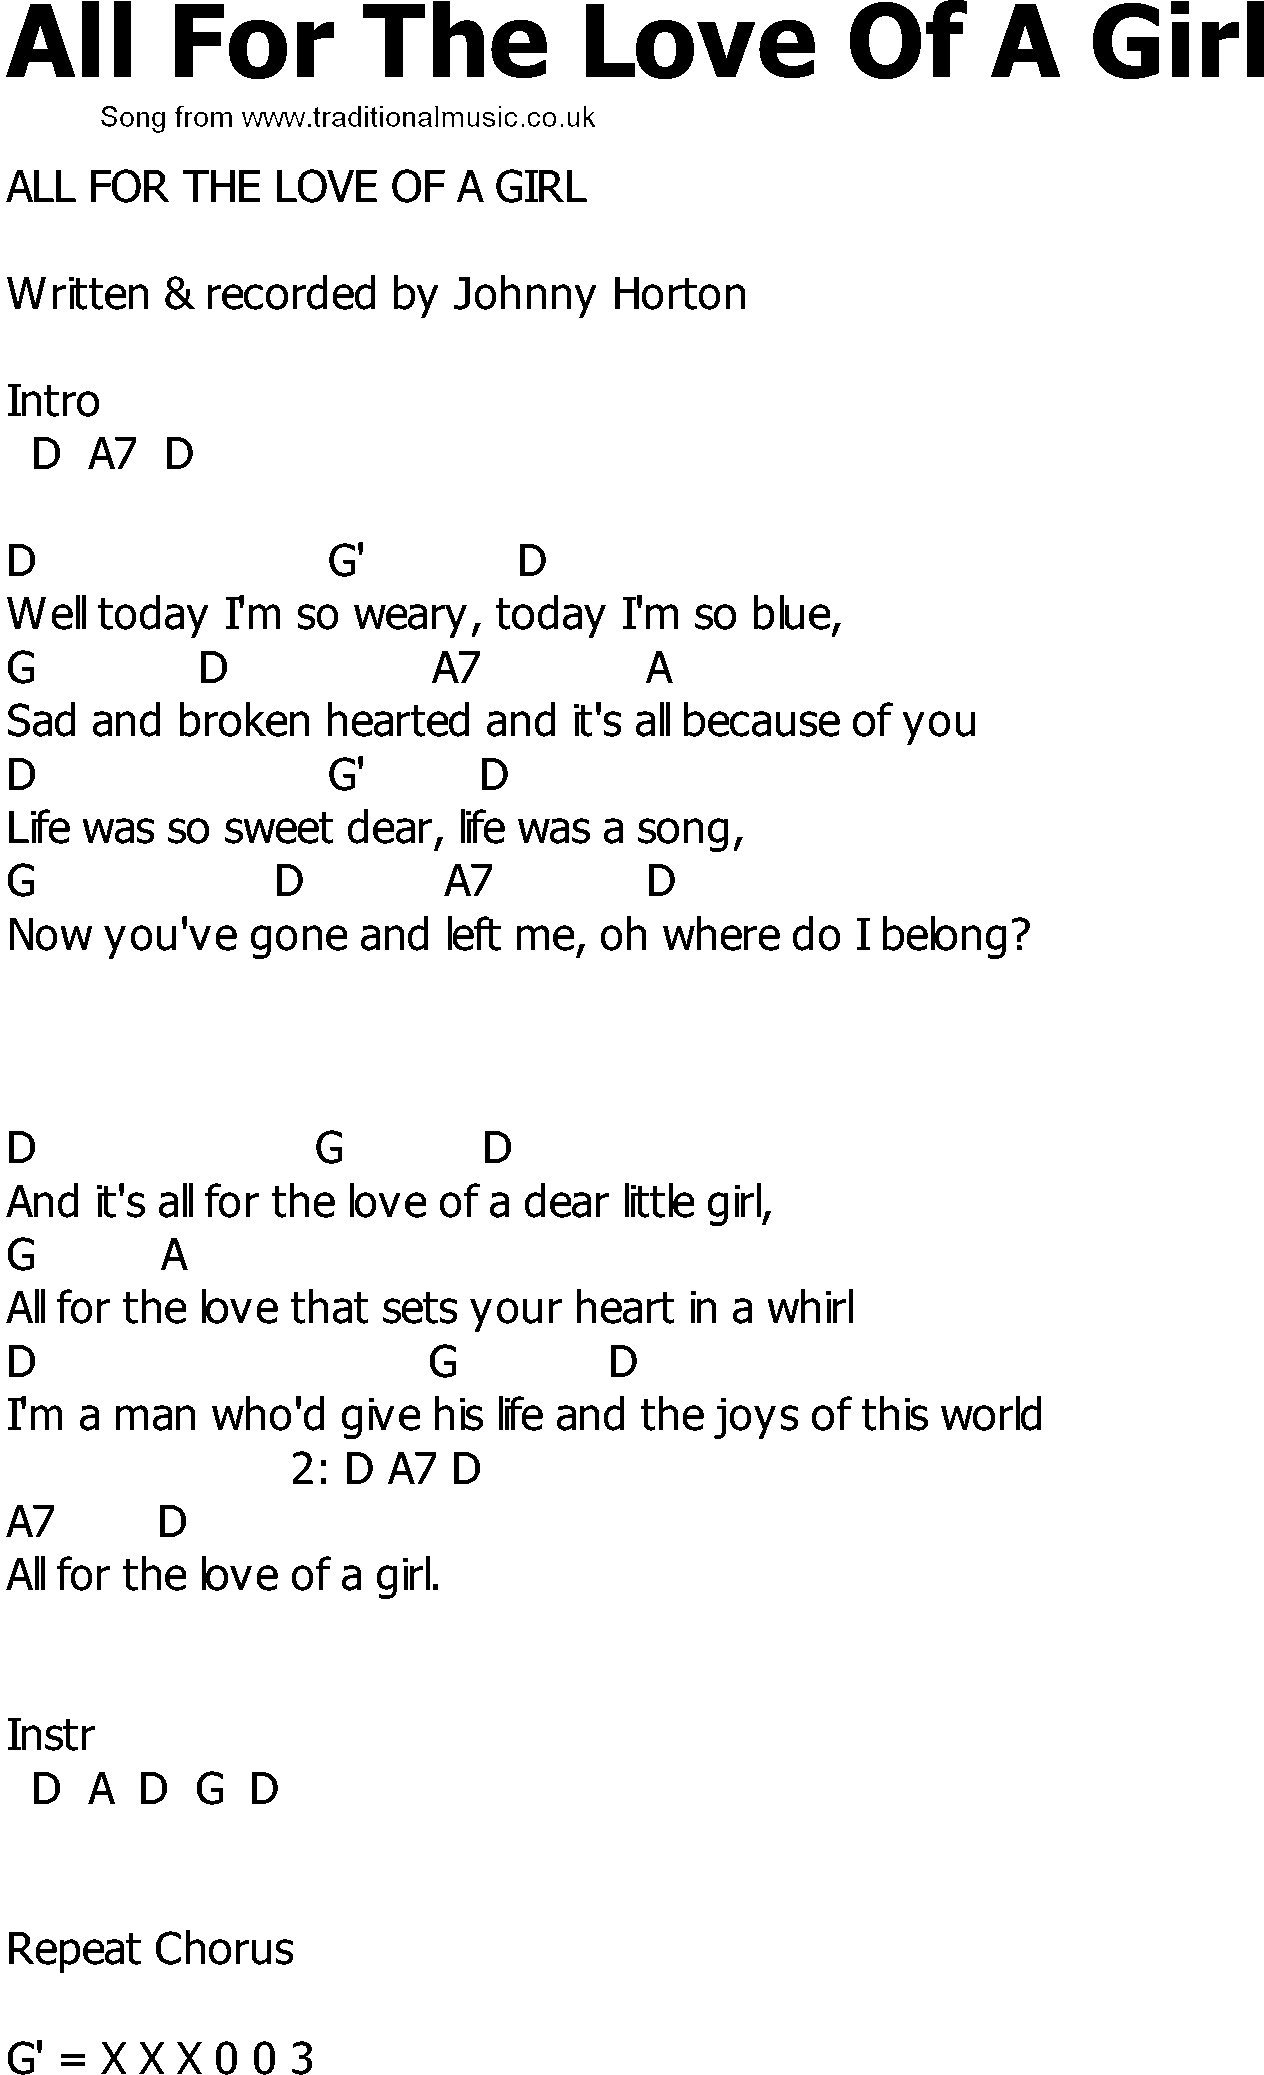 Old Country song lyrics with chords - All For The Love Of A Girl